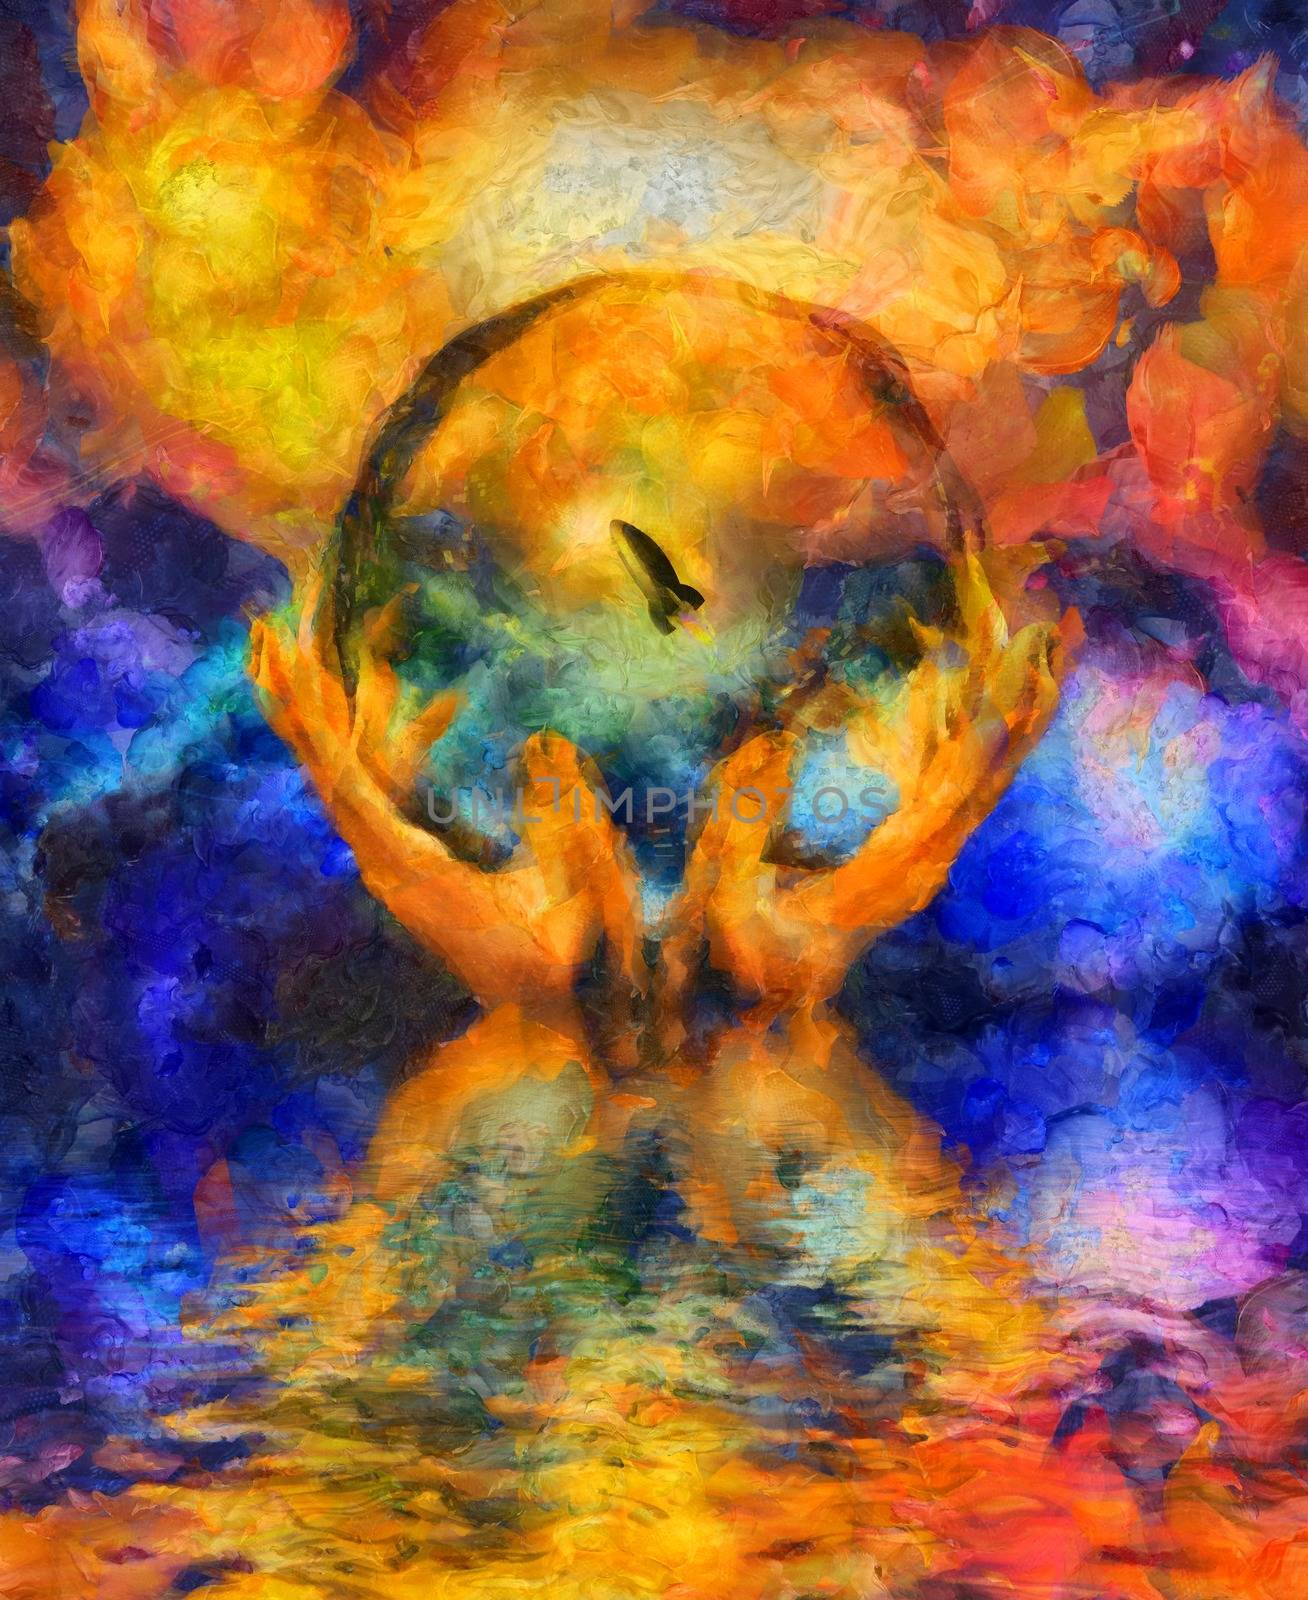 Surreal painting. Crystal ball in hands. Colorful universe reflects in the water. 3D rendering